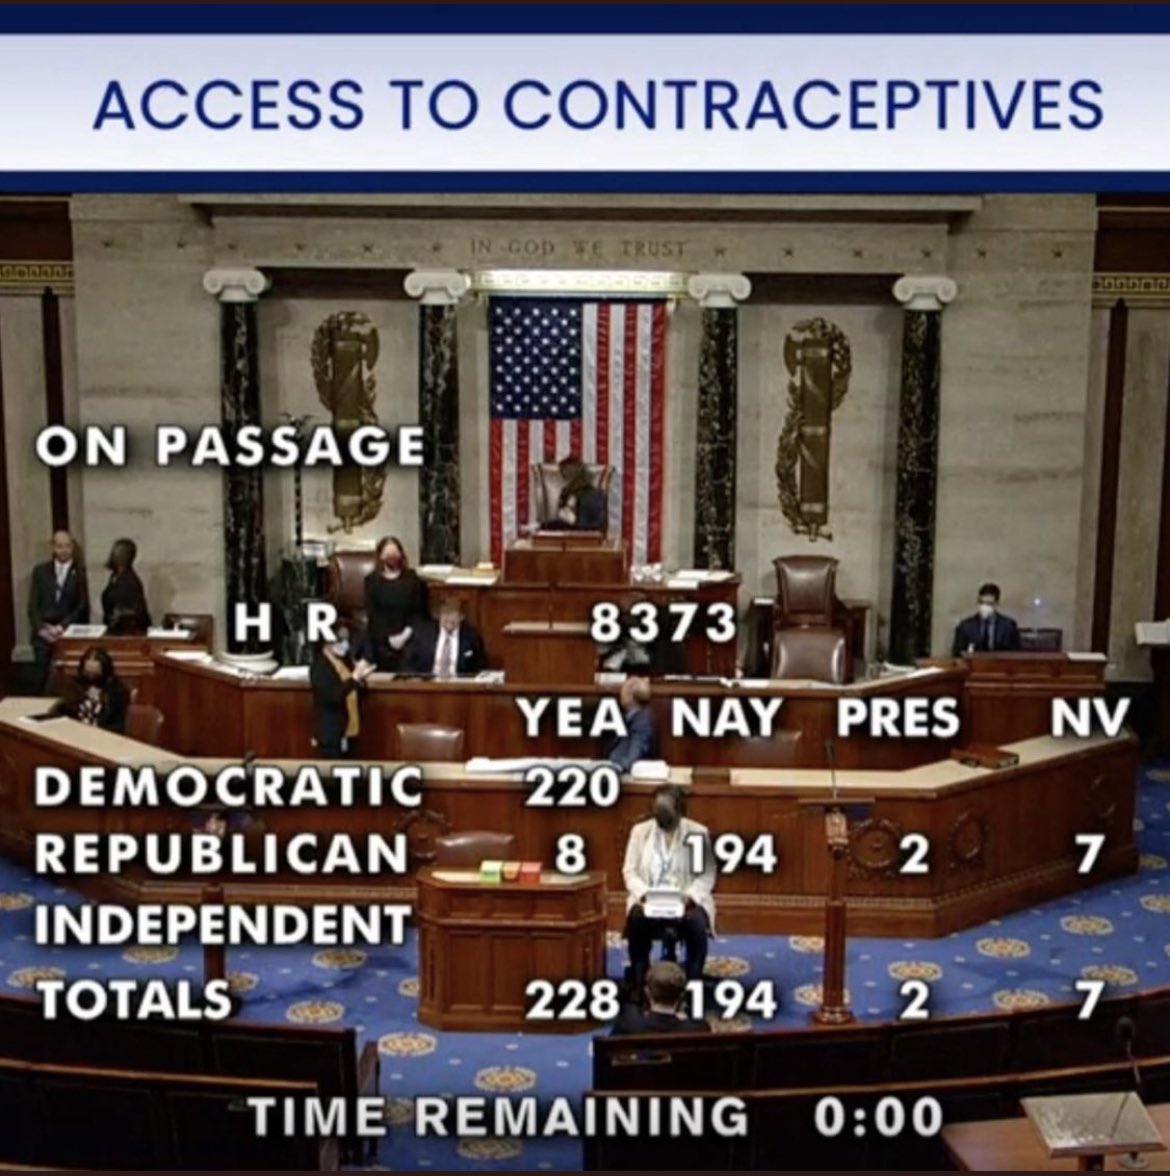 Dear women: 96% of Republicans voted against your legal right to have access to contraceptives and want to pass a national abortion ban. The midterms are in 23 days.